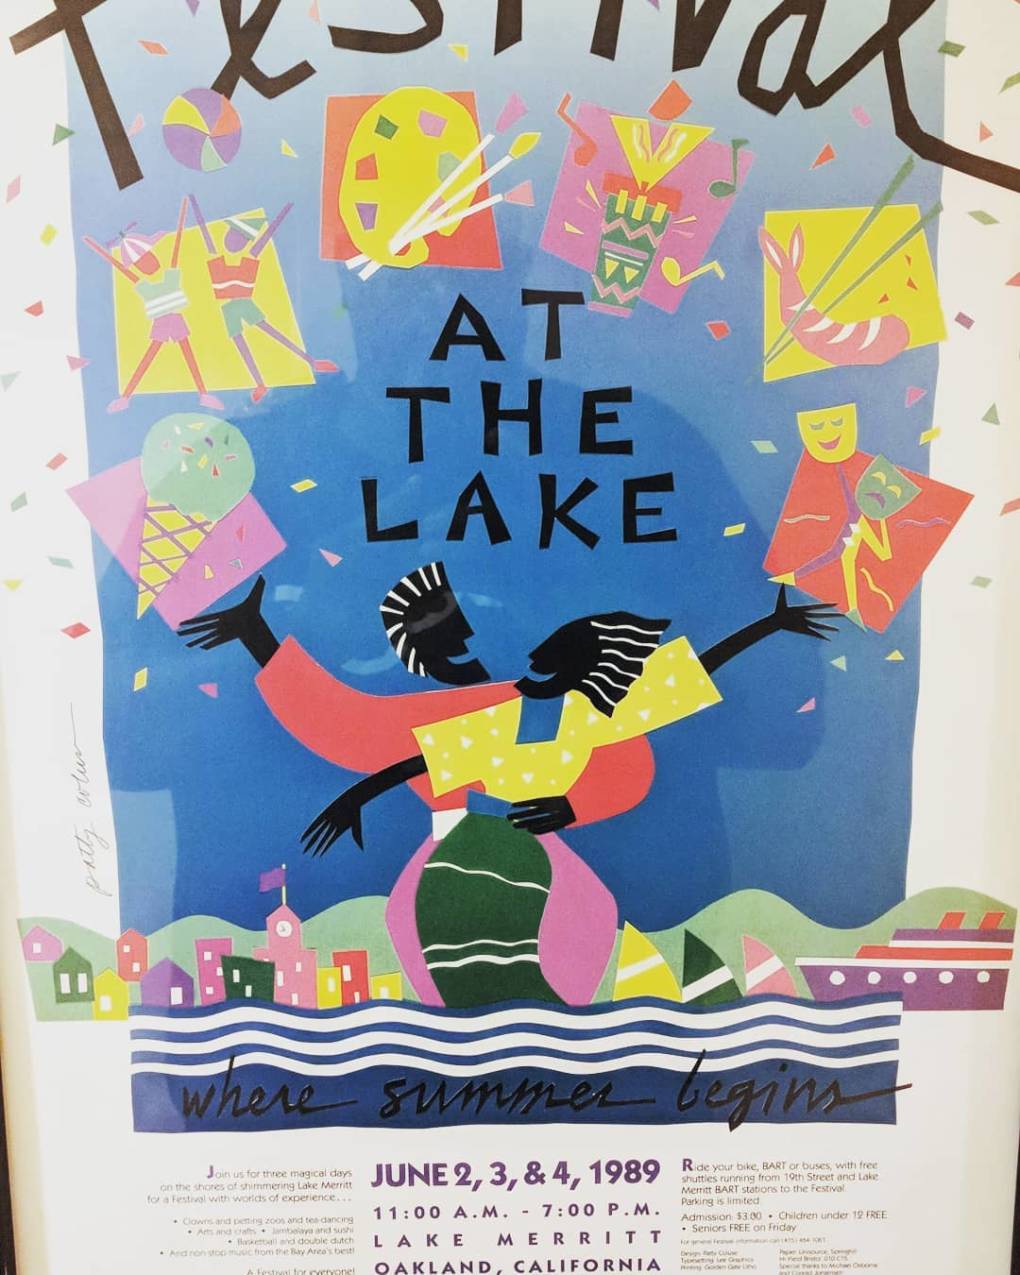 "'Member this? #RealOakland. Where the playas showed up and showed out and the women came out to do one another in they biker shorts and asymmetrical perms... BUT still family friendly really bring the kiddies out," writes @antmooak in an Instagram post about the Festival at the Lake.